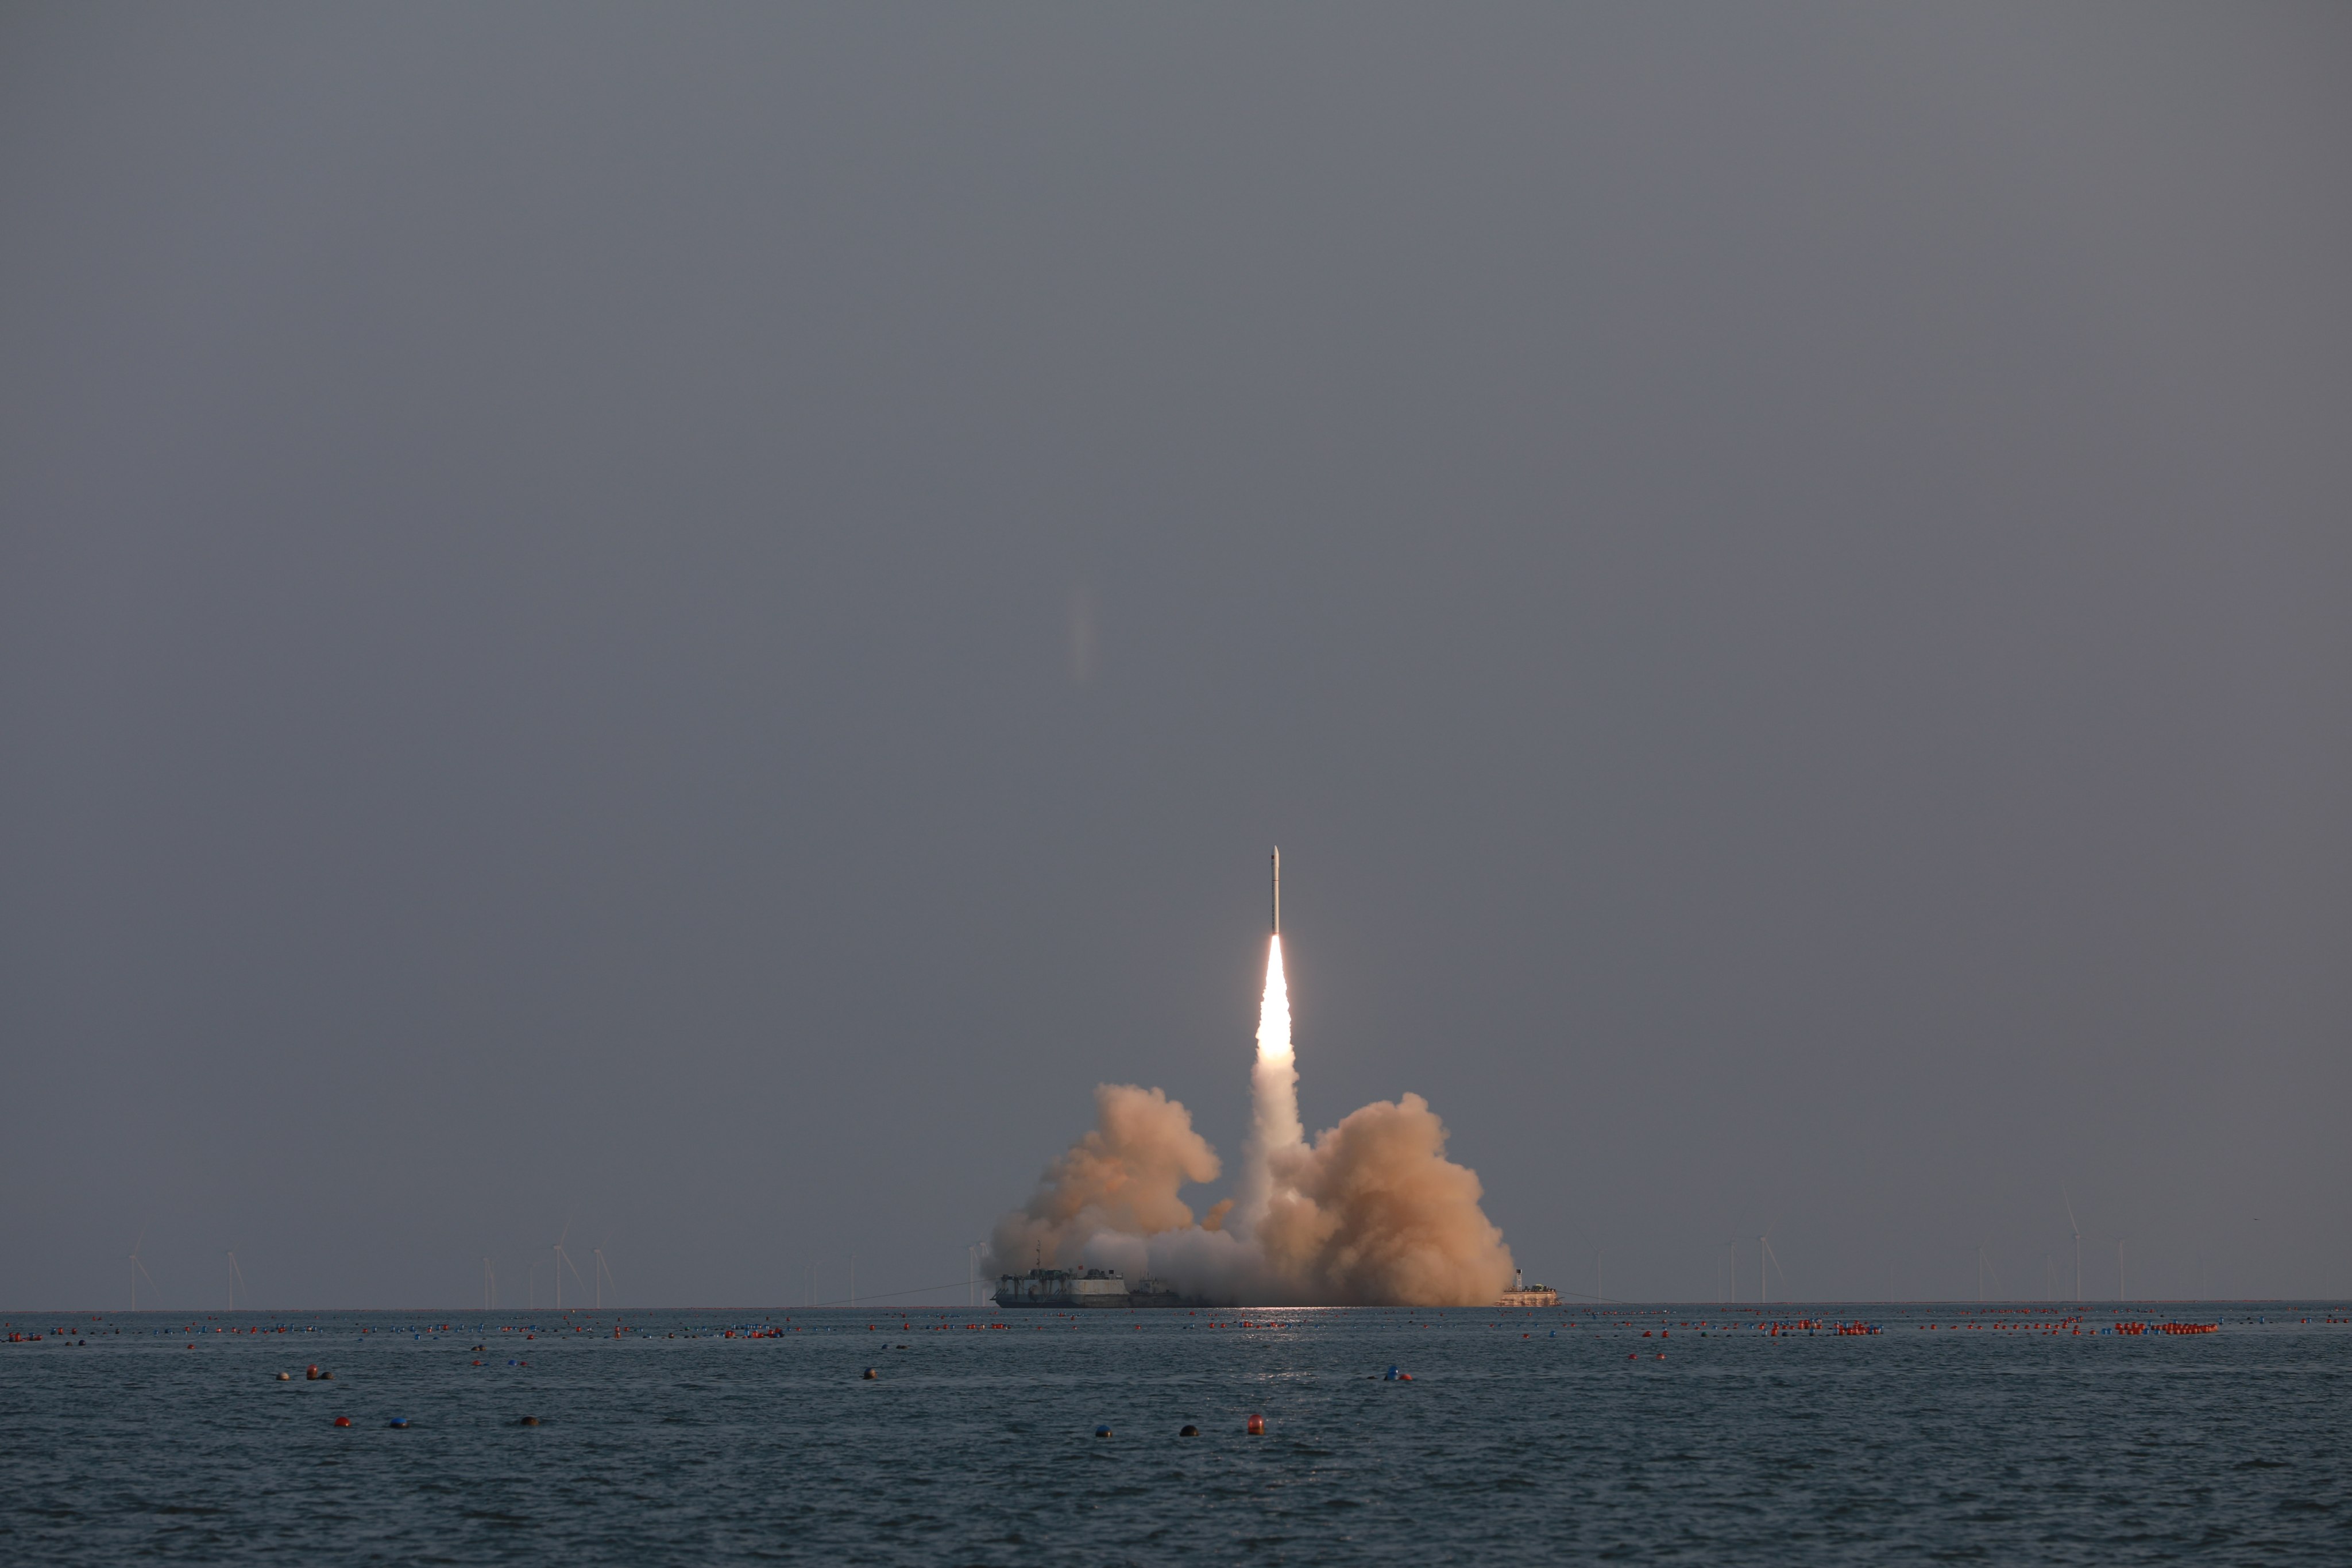 The commercial launch vehicle Ceres-1, carrying four satellites, blasts off from waters near Haiyang in Shandong province on Tuesday. Photo: EPA-EFE/Xinhua